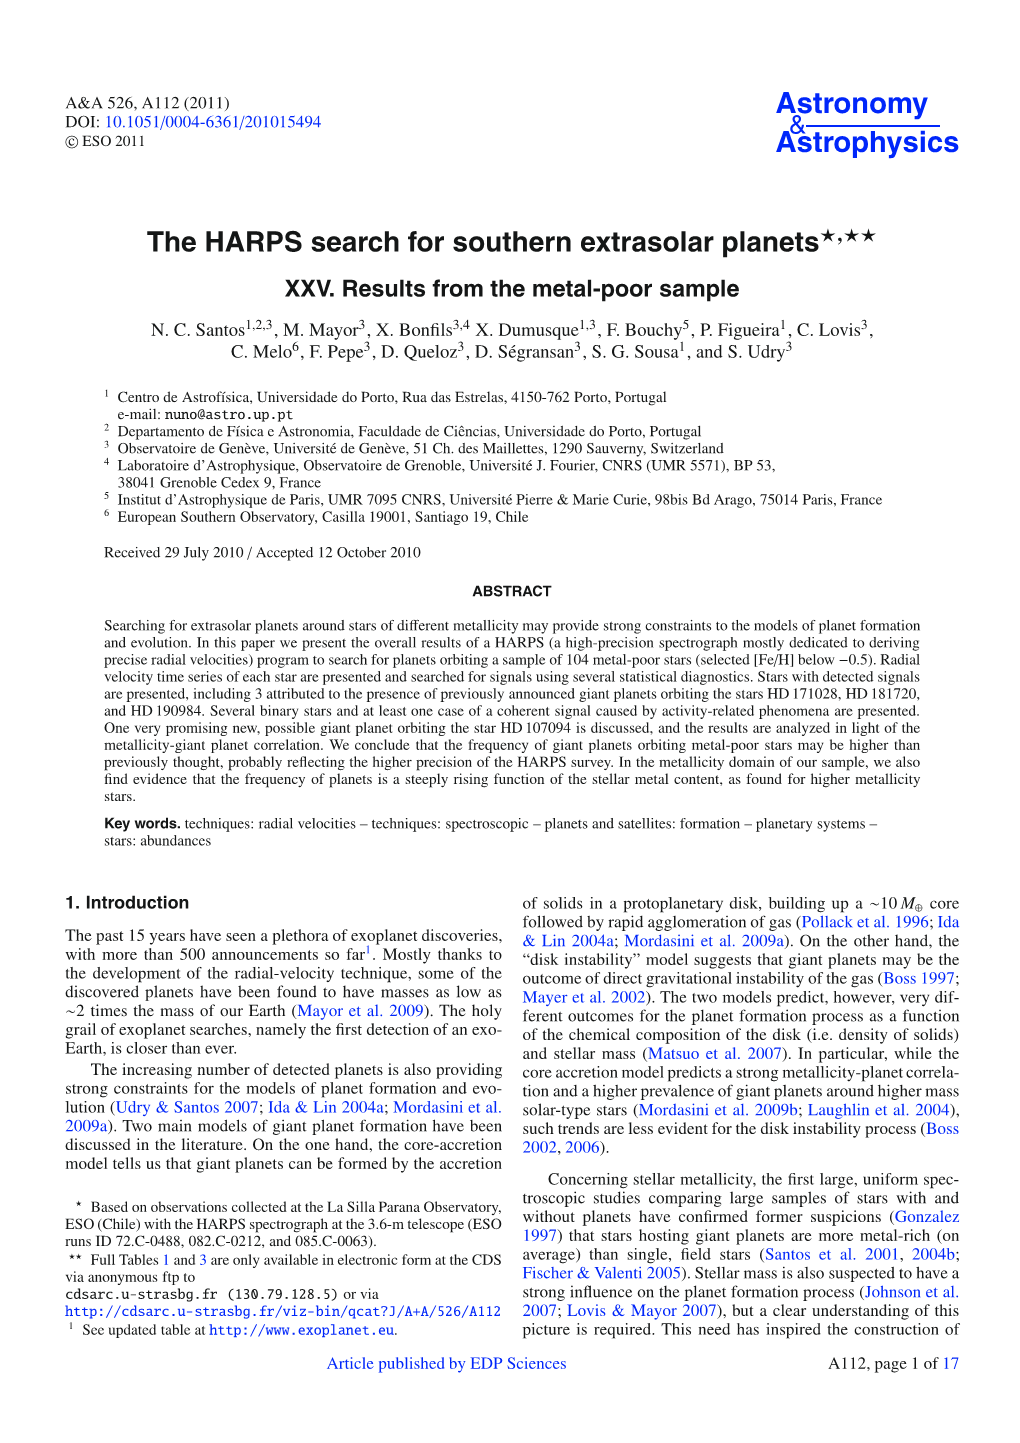 The HARPS Search for Southern Extrasolar Planets⋆⋆⋆